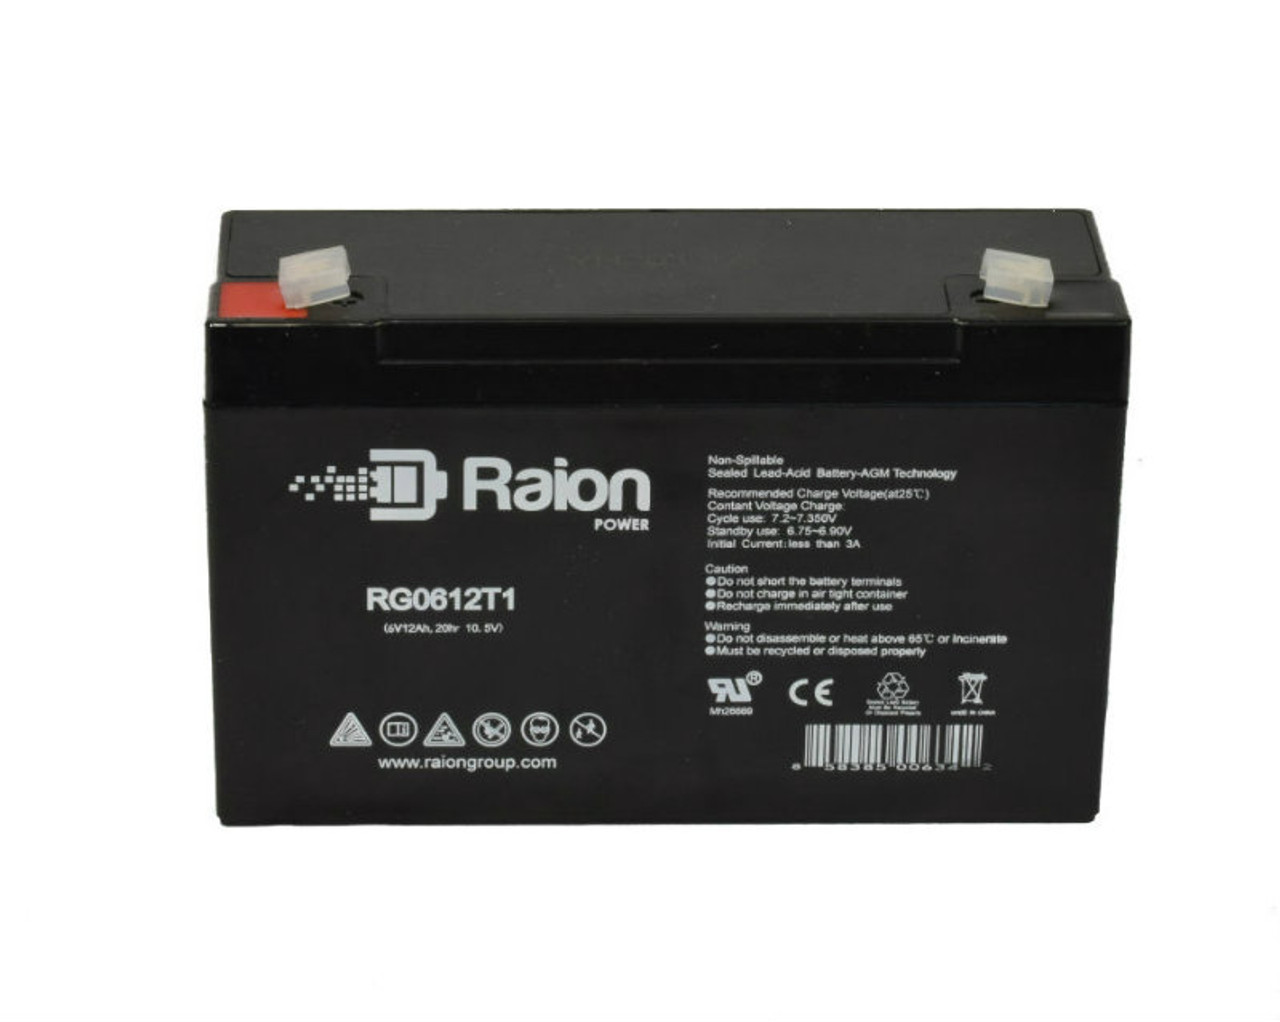 Raion Power RG06120T1 Replacement Battery Cartridge for Tripp Lite BC1050 Pro